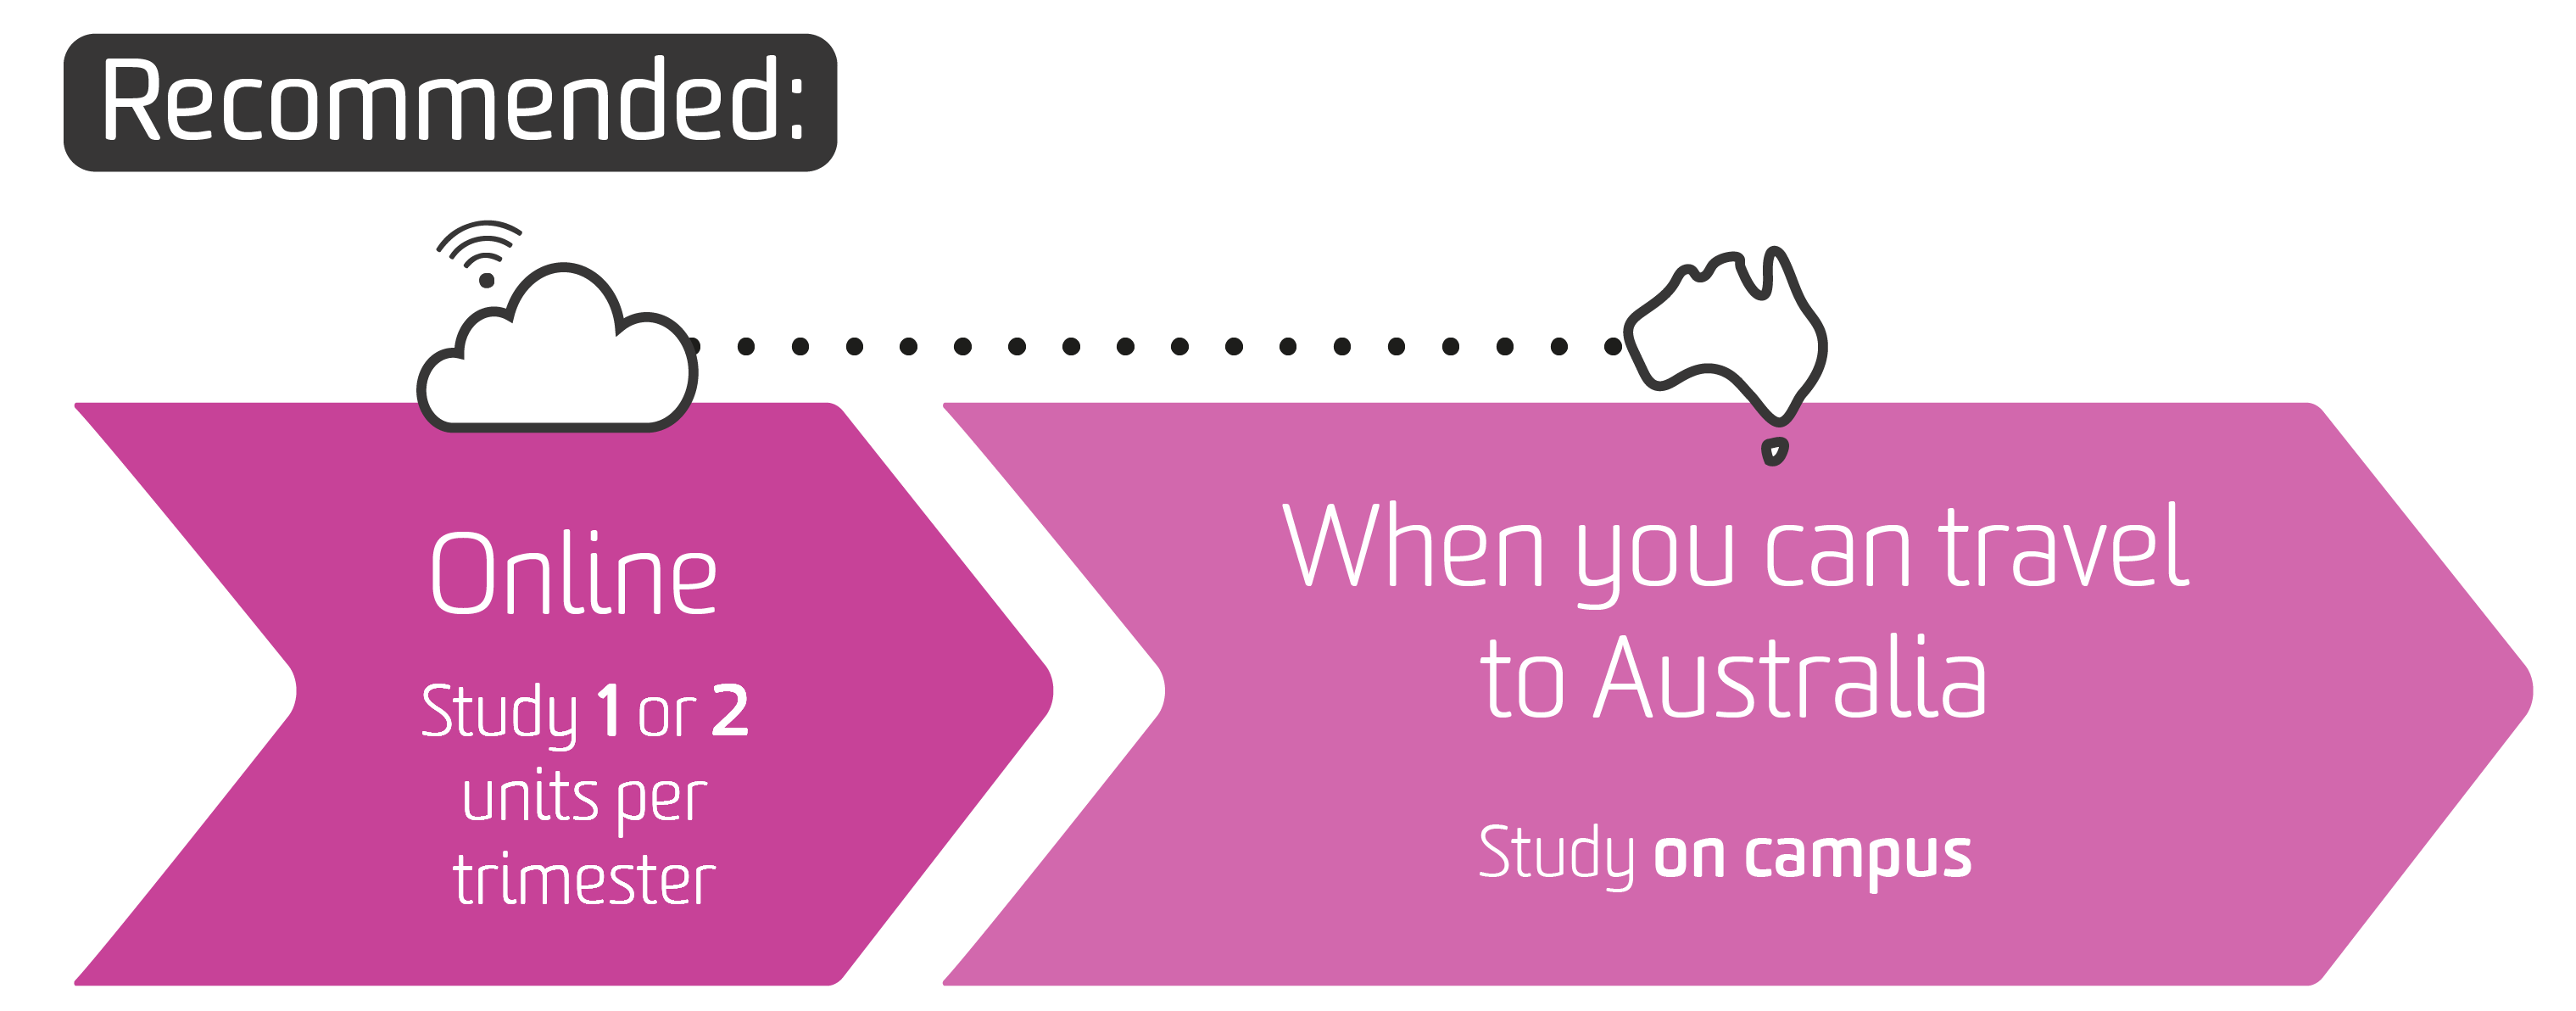 The diagram shows the recommended option: study 1 or 2 units online. When you can travel to Australia, study on campus.